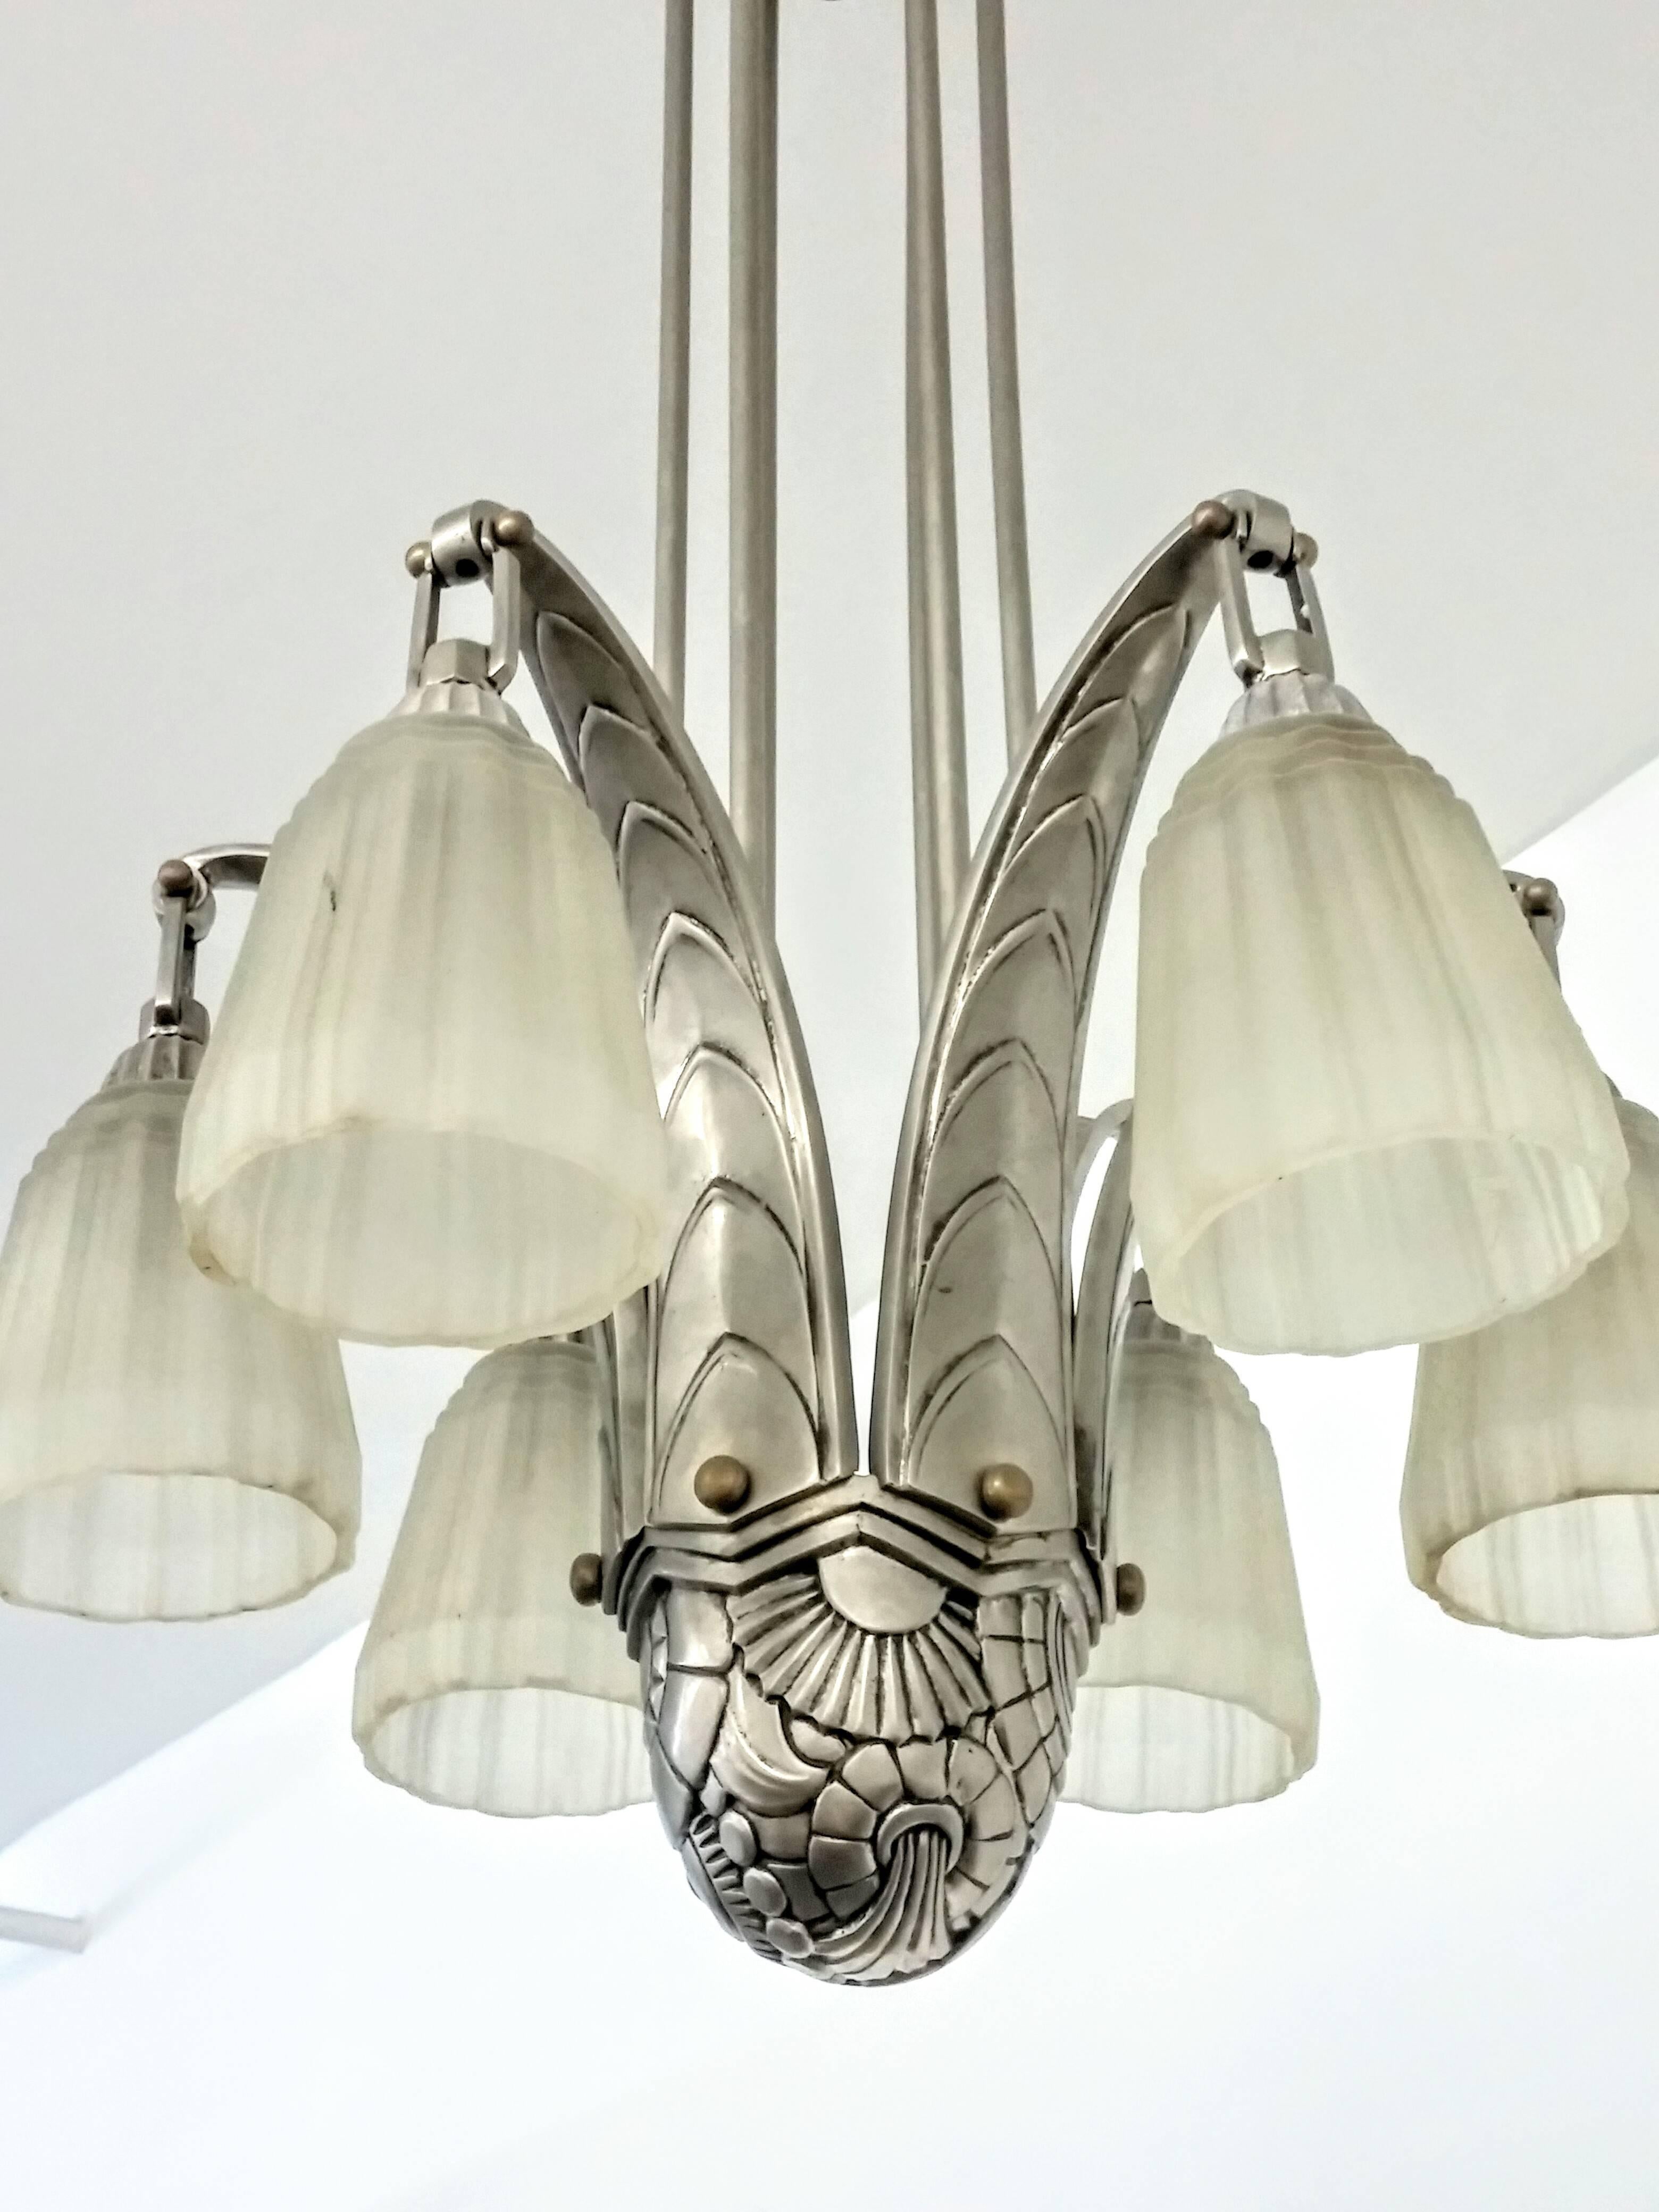 
A stunning French Art Deco chandelier with a half dome flower geometric motif centerpiece supporting six stylized overlapping leaf design arms, issuing conical frosted glass ribbed tulip designs. Six rods are held by a matching cone shaped canopy.